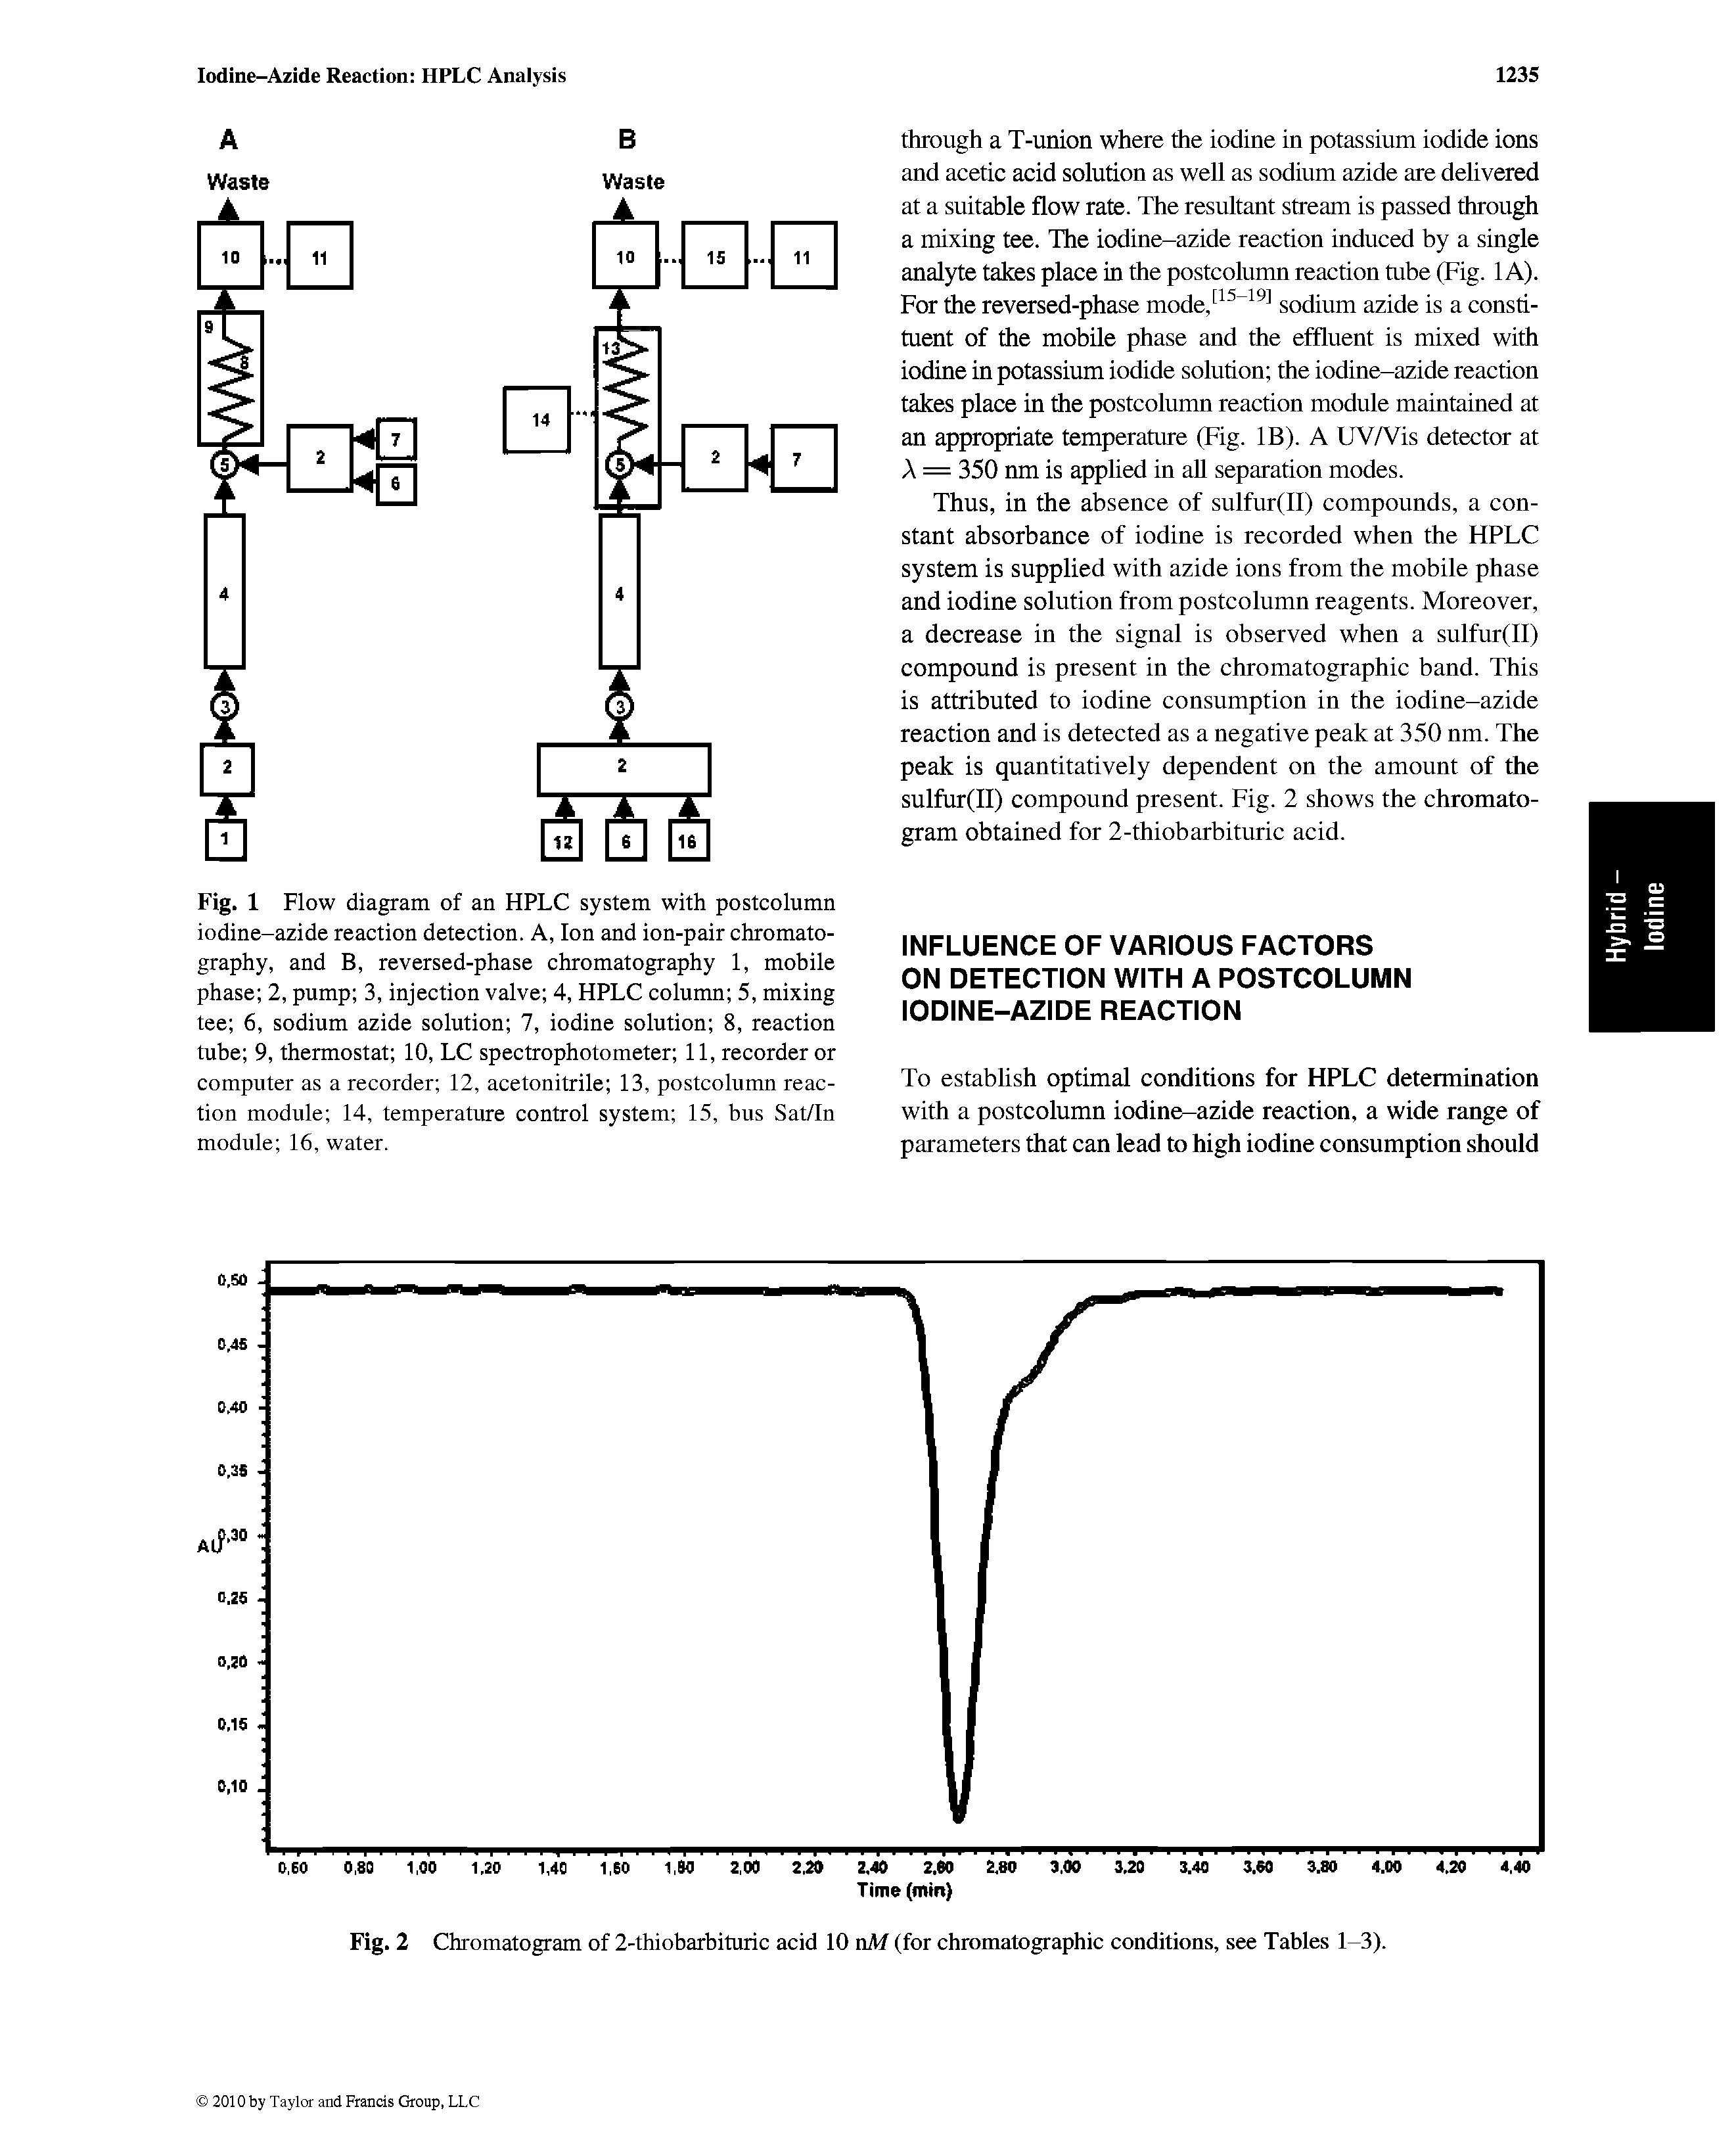 Fig. 1 Flow diagram of an HPLC system with postcolumn iodine-azide reaction detection. A, Ion and ion-pair chromatography, and B, reversed-phase chromatography 1, mobile phase 2, pump 3, injection valve 4, HPLC column 5, mixing tee 6, sodium azide solution 7, iodine solution 8, reaction tube 9, thermostat 10, LC spectrophotometer 11, recorder or computer as a recorder 12, acetonitrile 13, postcolumn reaction module 14, temperature control system 15, bus Sat/In module 16, water.